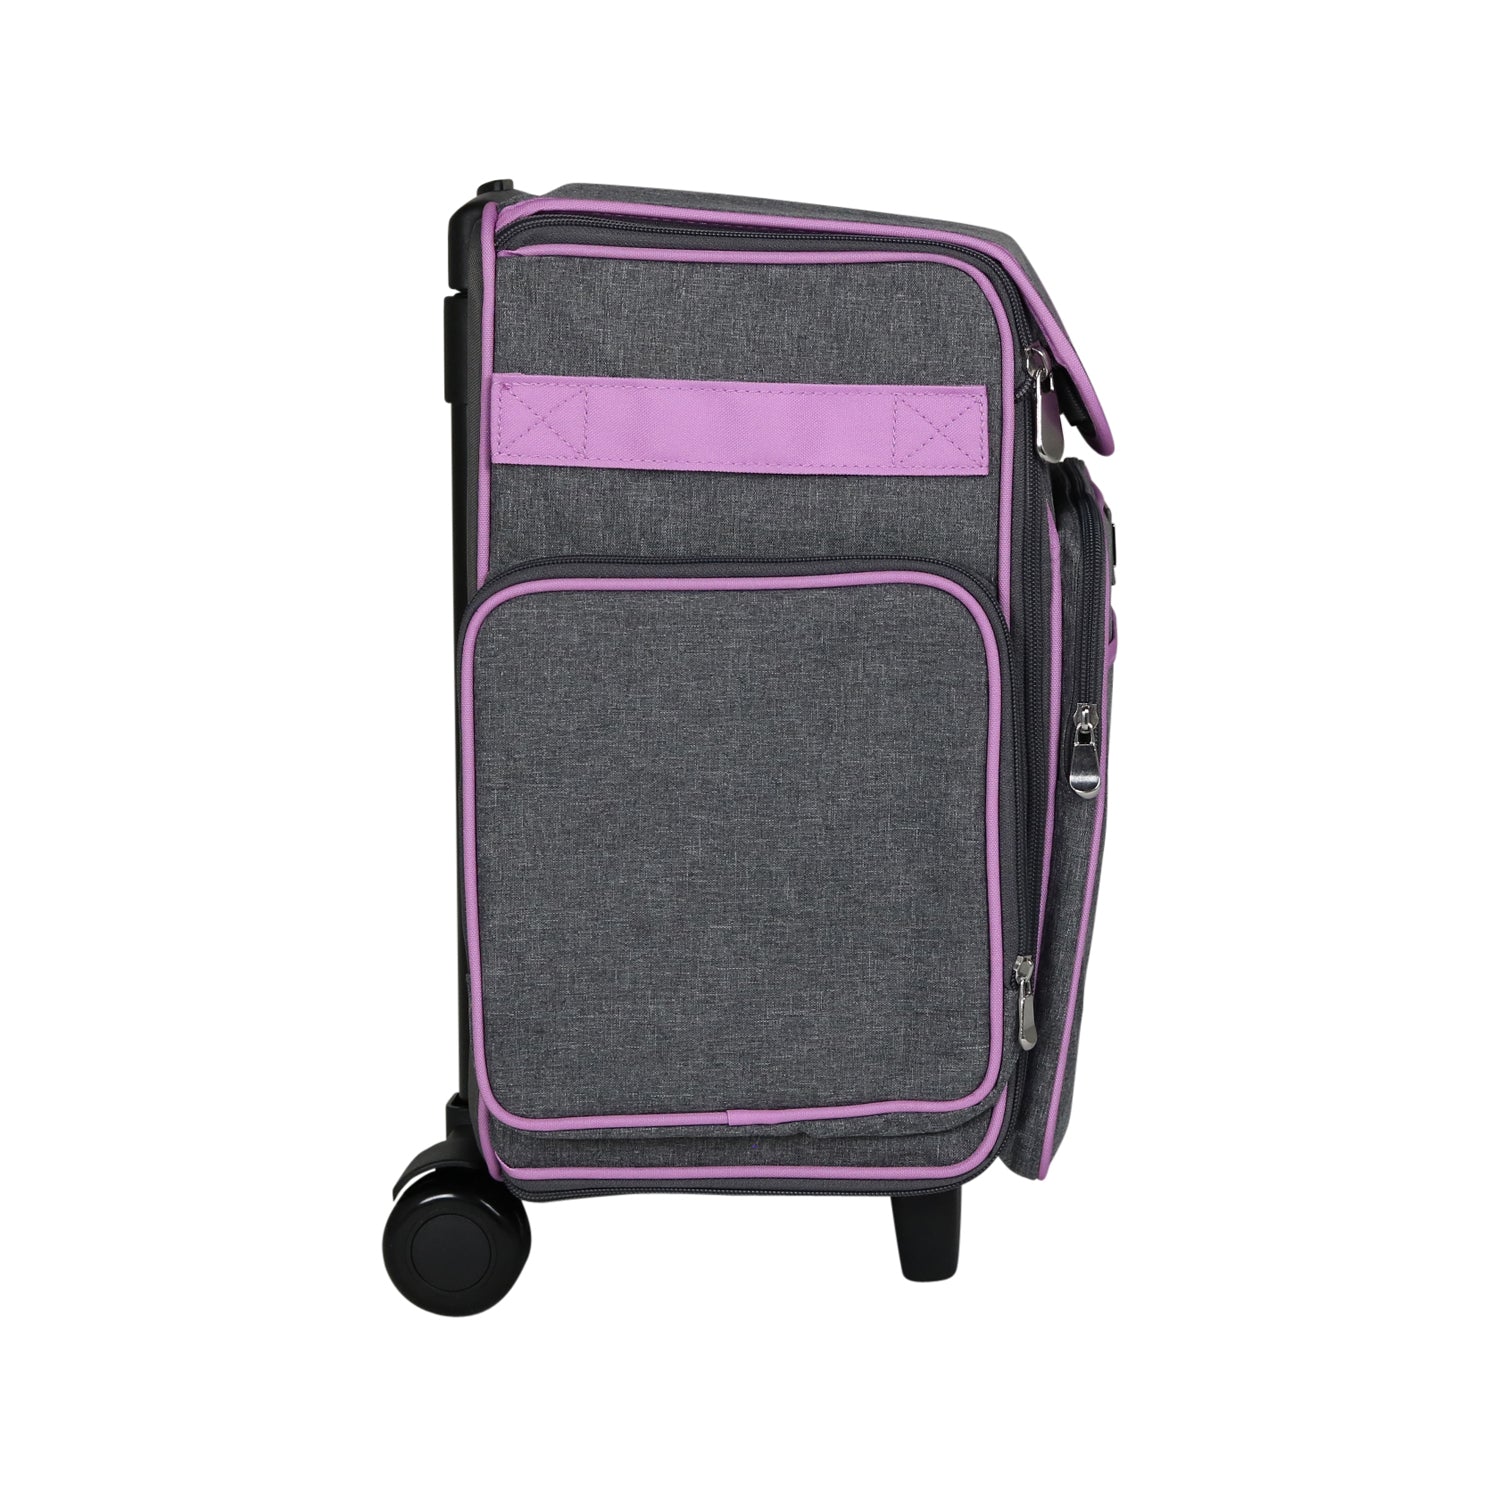 Collapsible Plastic Rolling Craft Cart, Pink - Everything Mary